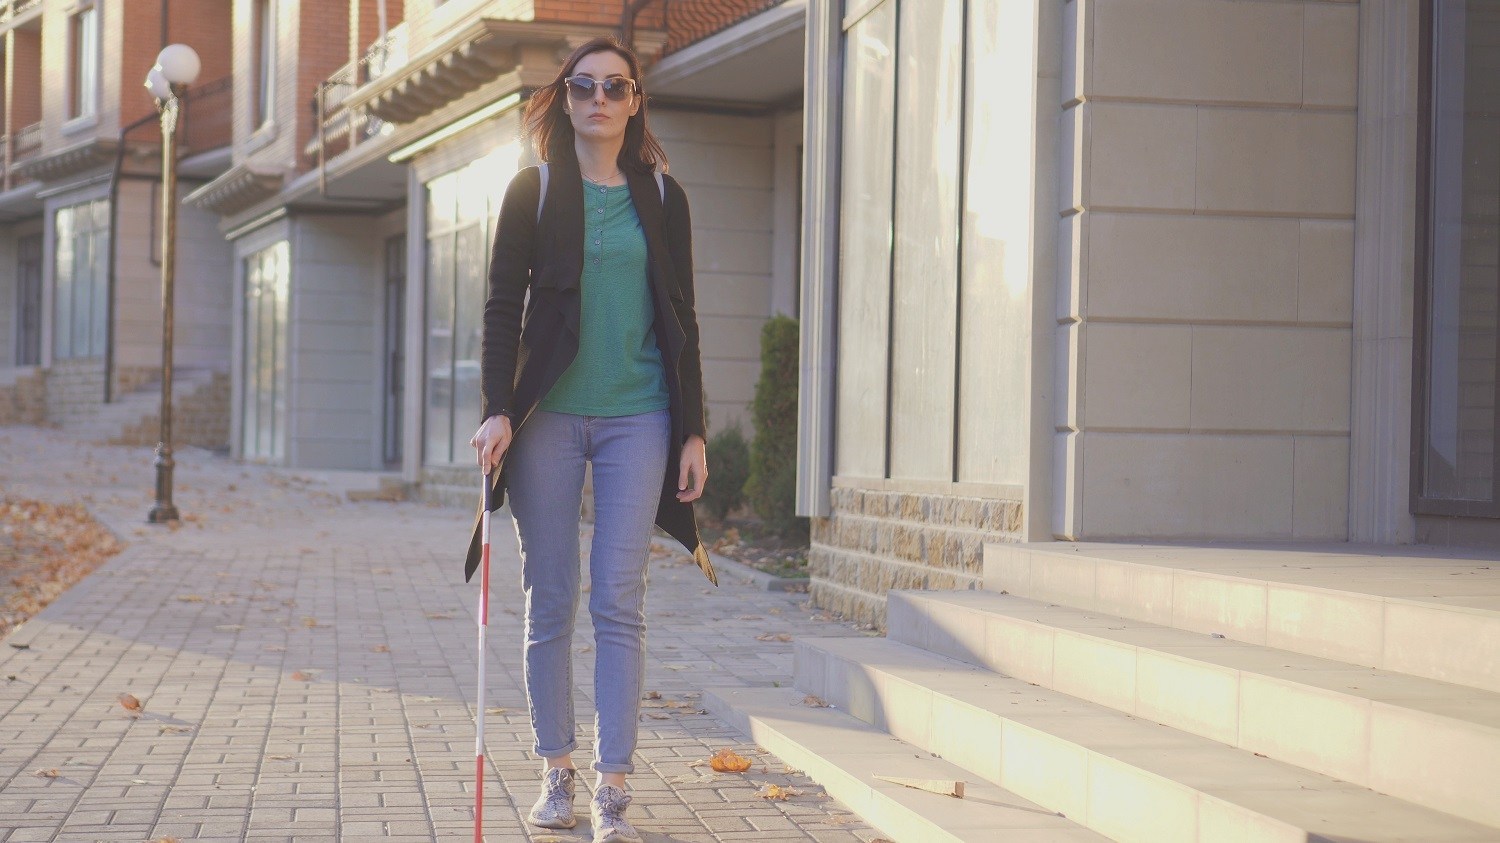 A woman walking on the street using a white cane